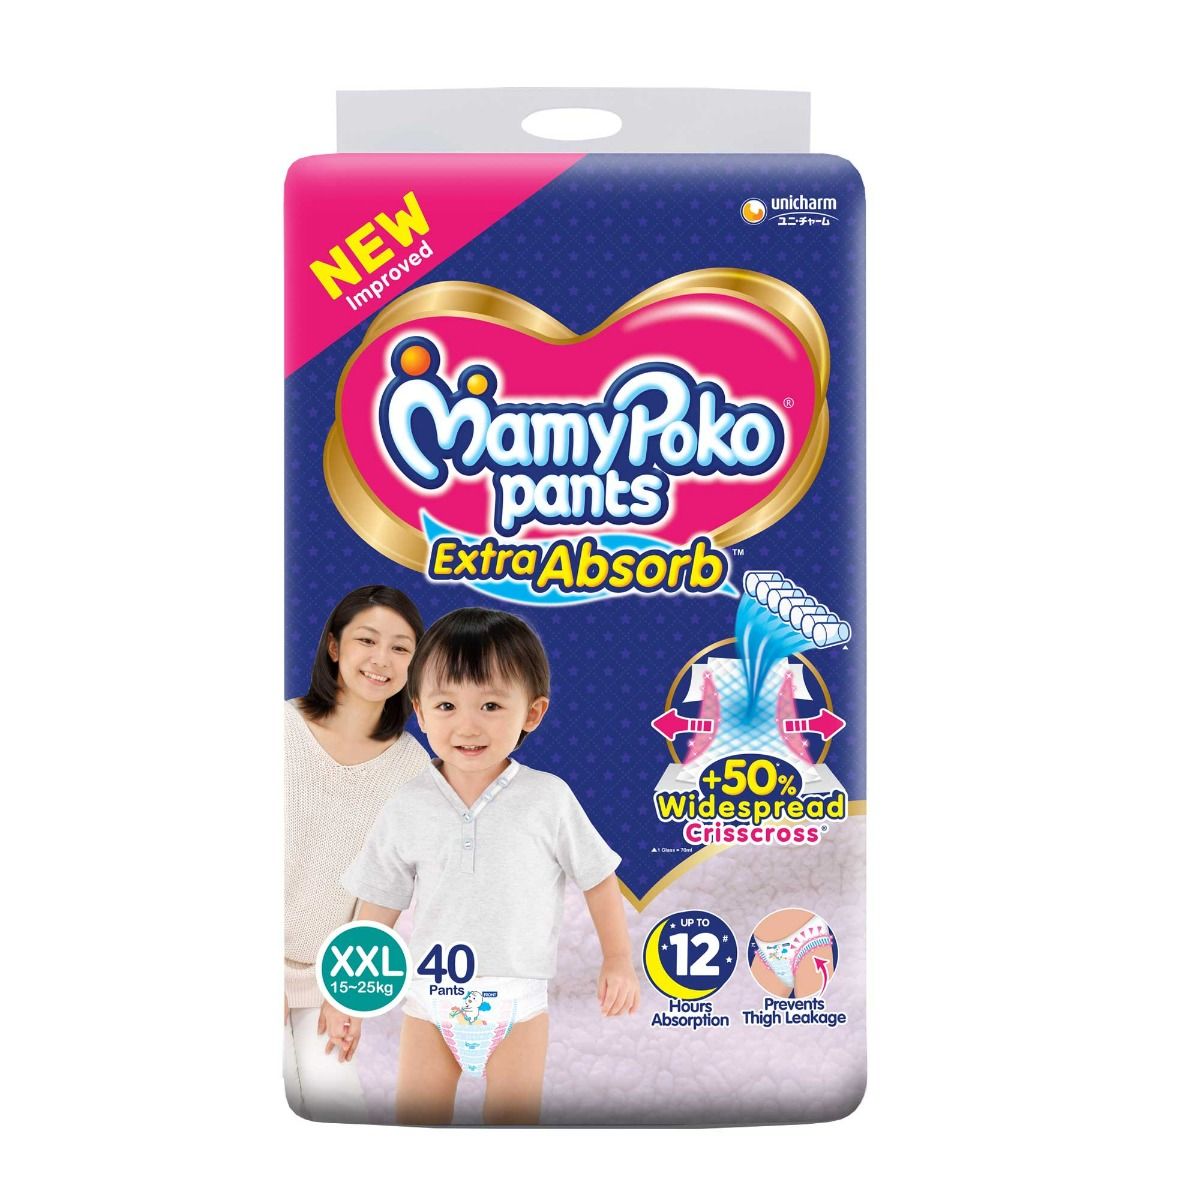 MamyPoko Extra Absorb Diaper Pants XXL, 40 Count, Pack of 1 